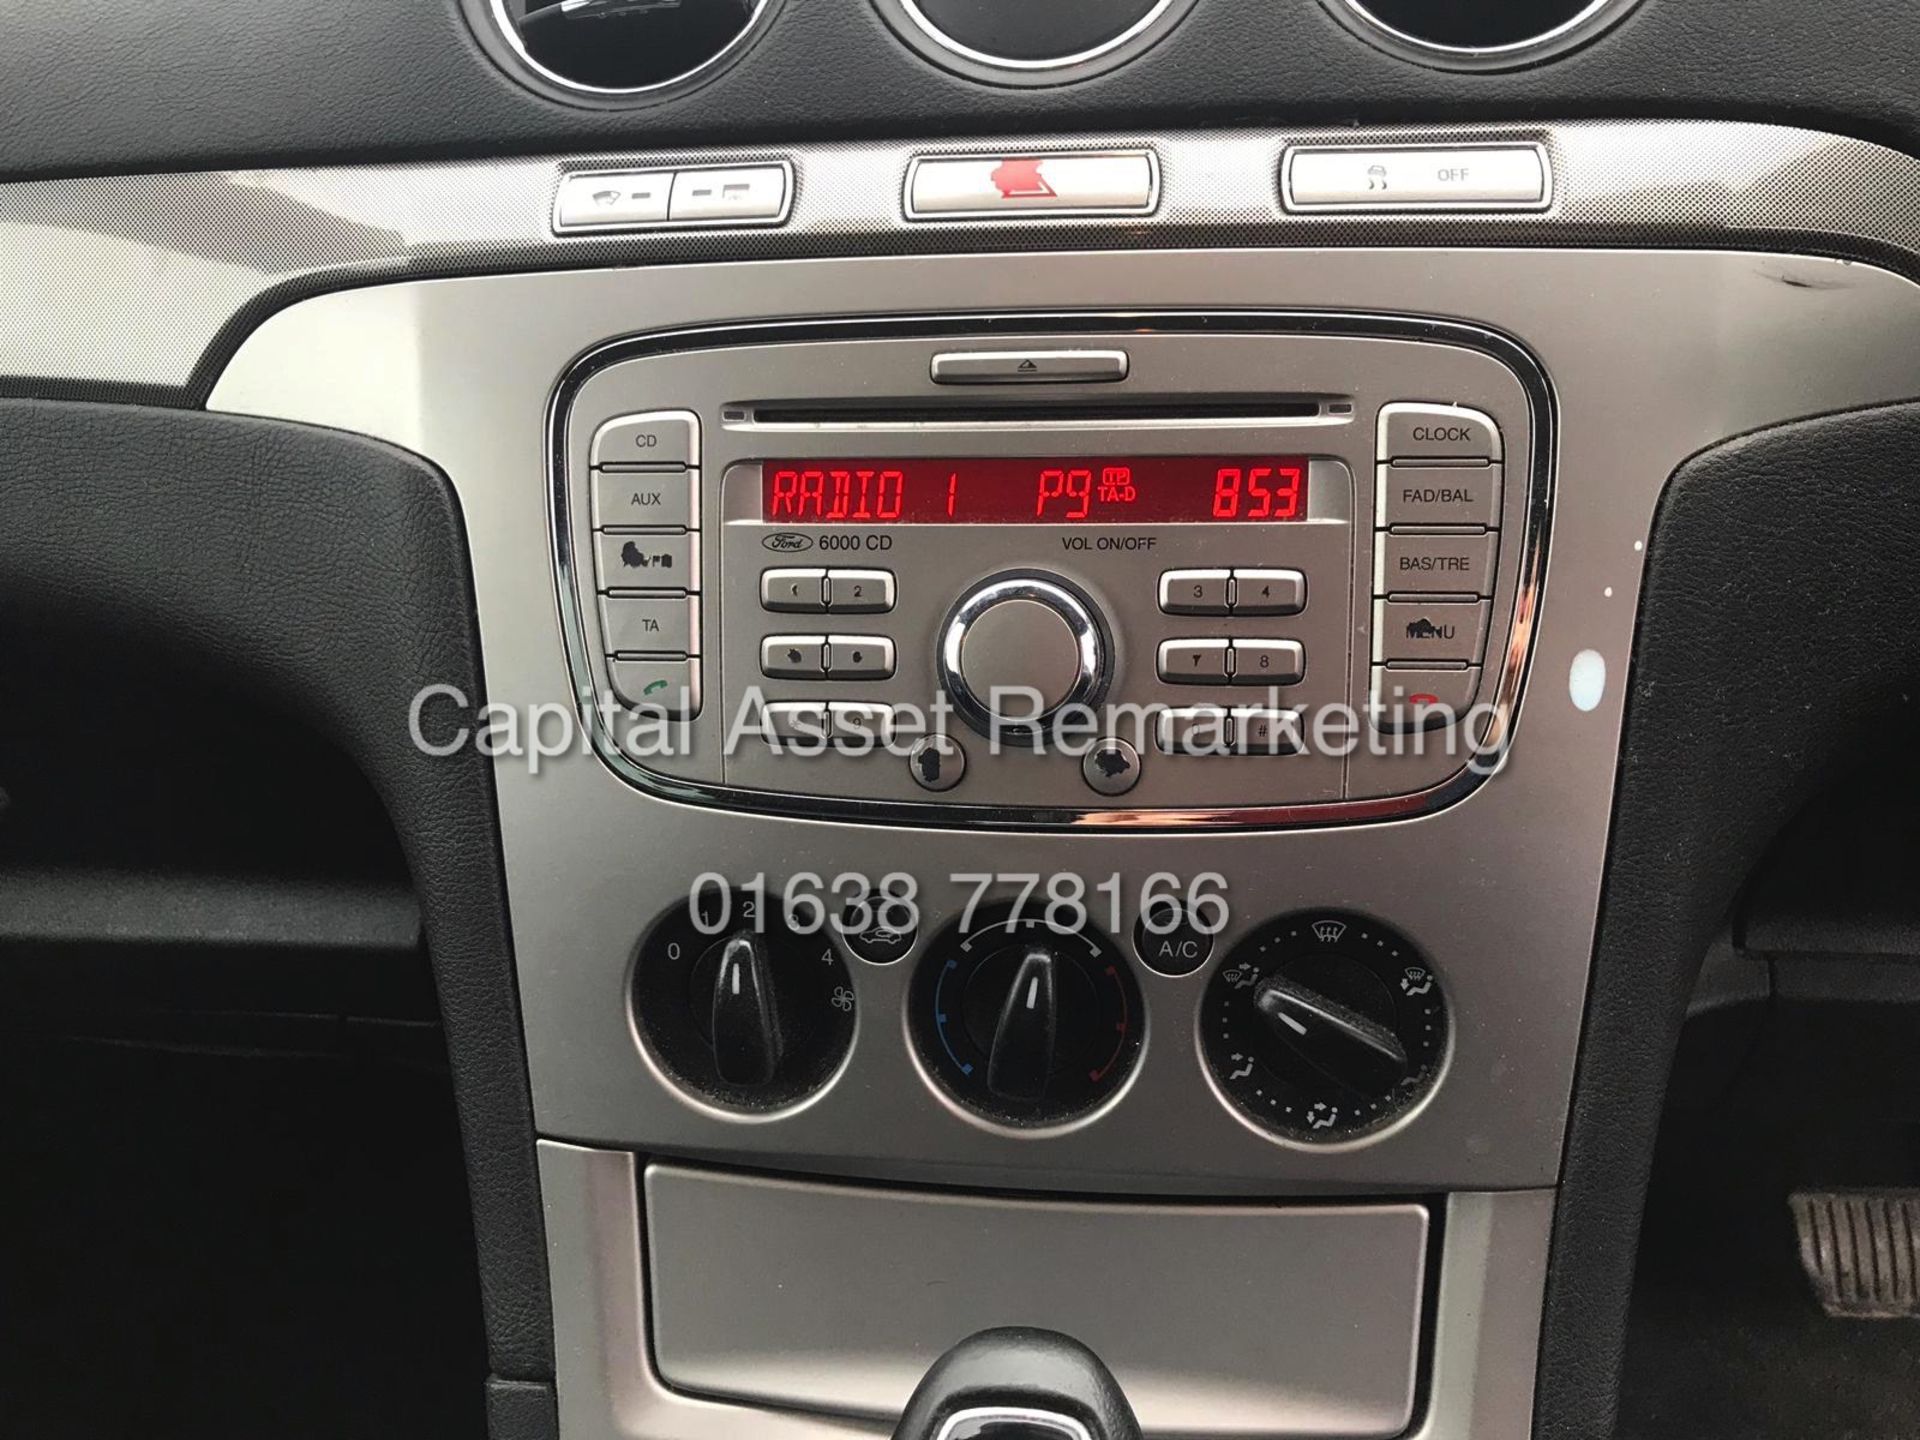 (ON SALE) FORD GALAXY 2.0TDCI "EDGE" 7 SEATER - 08 REG - AIR CON - 1 PREVIOUS OWNER - BLACK - Image 14 of 14